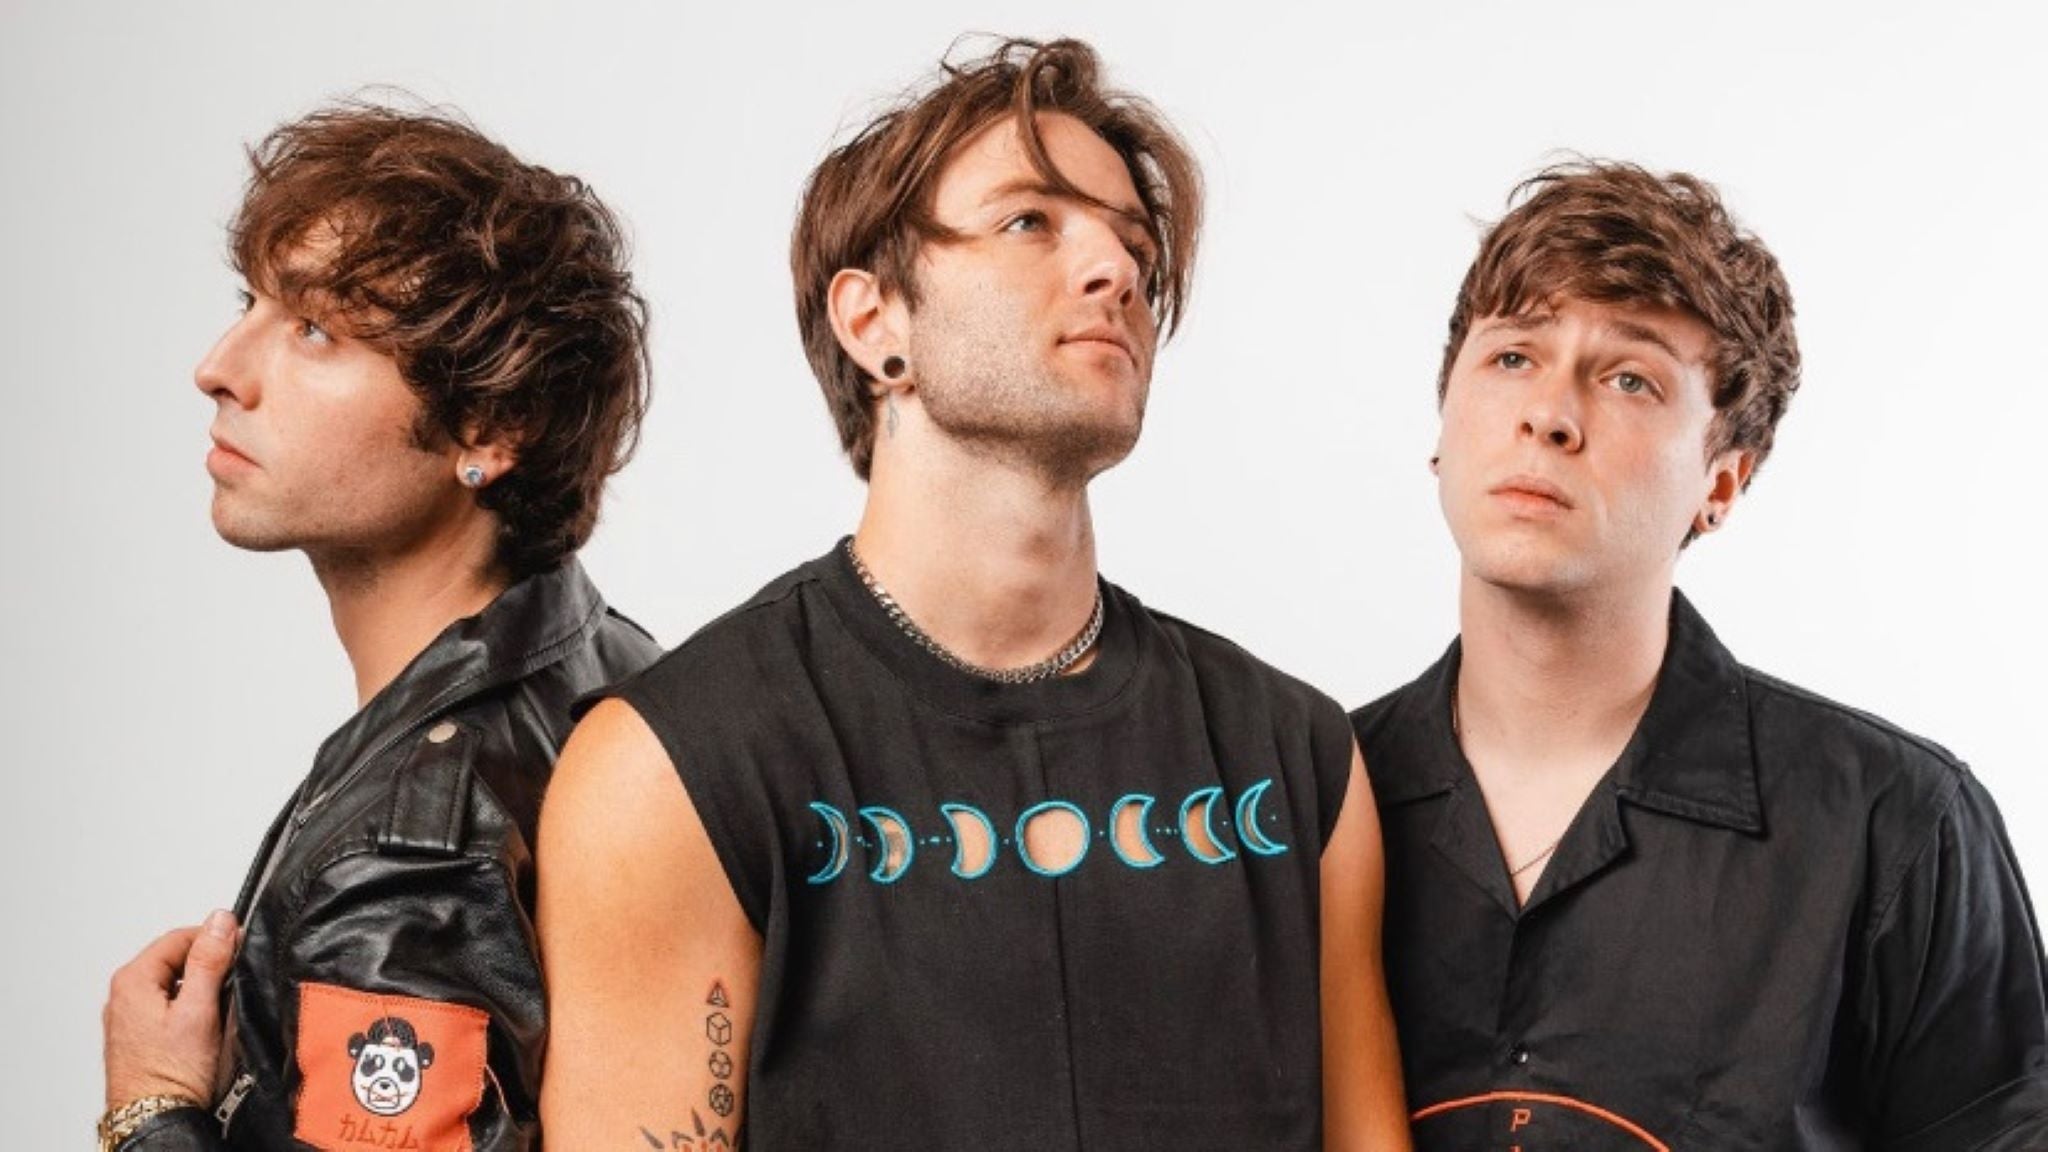 Emblem3 in New York promo photo for Exclusive presale offer code